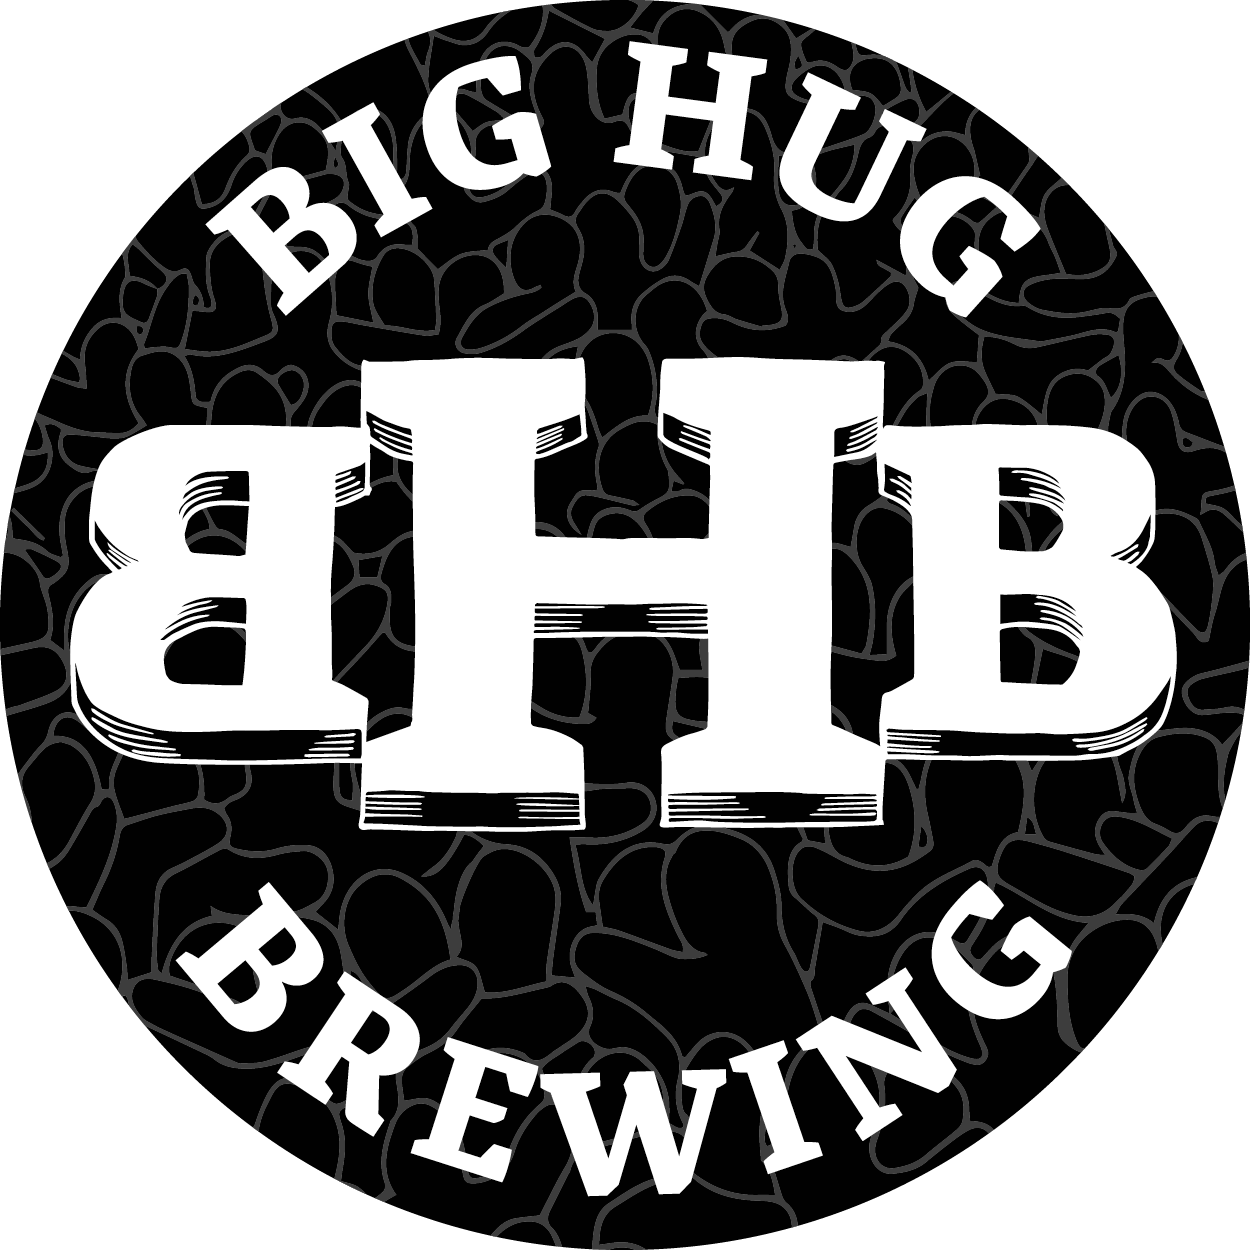 BIG HUG BREWING - Get 15% Off Your First Order By Joining Our Mailing List